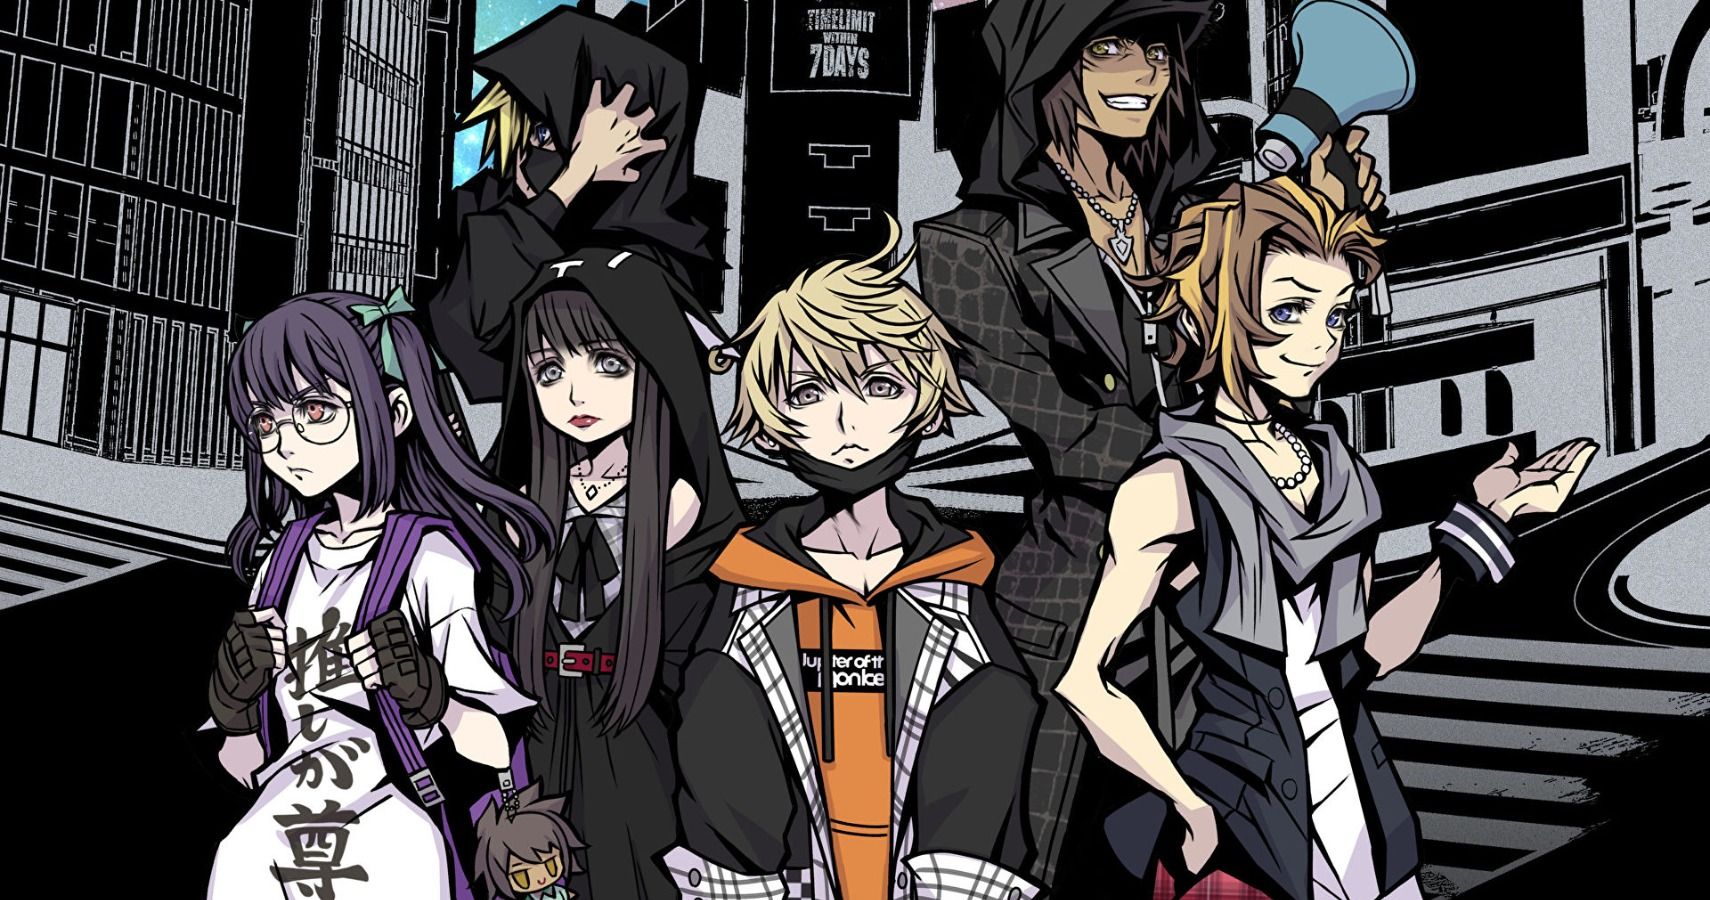 NEO The World Ends With You Makes Me Feel Like An Edgy Weeaboo Teenager Again